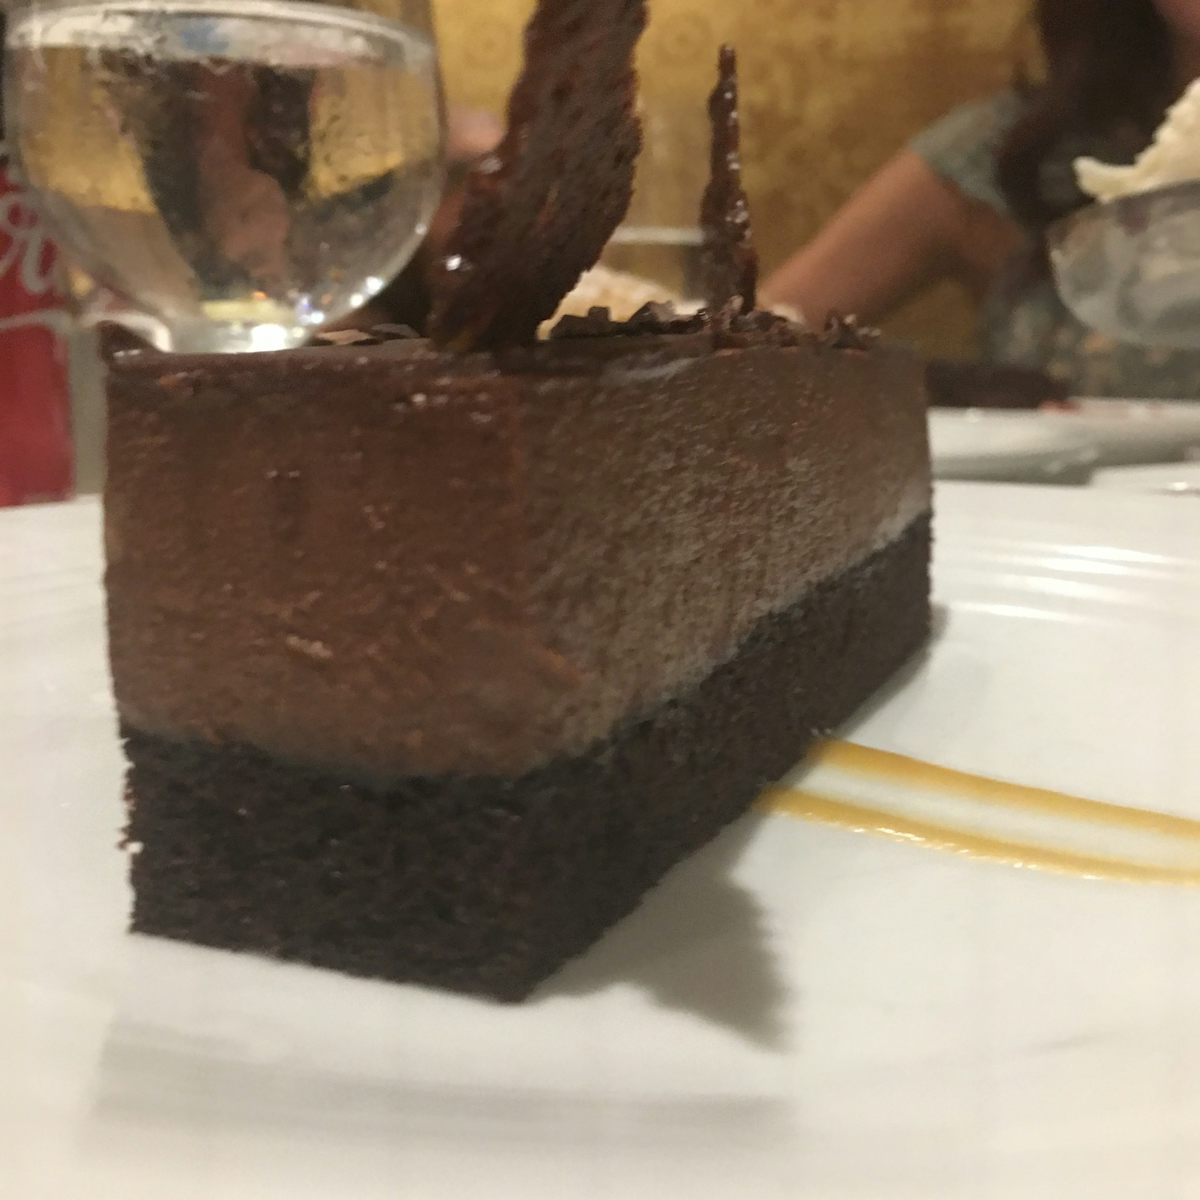 Chocolate cake from dinning room